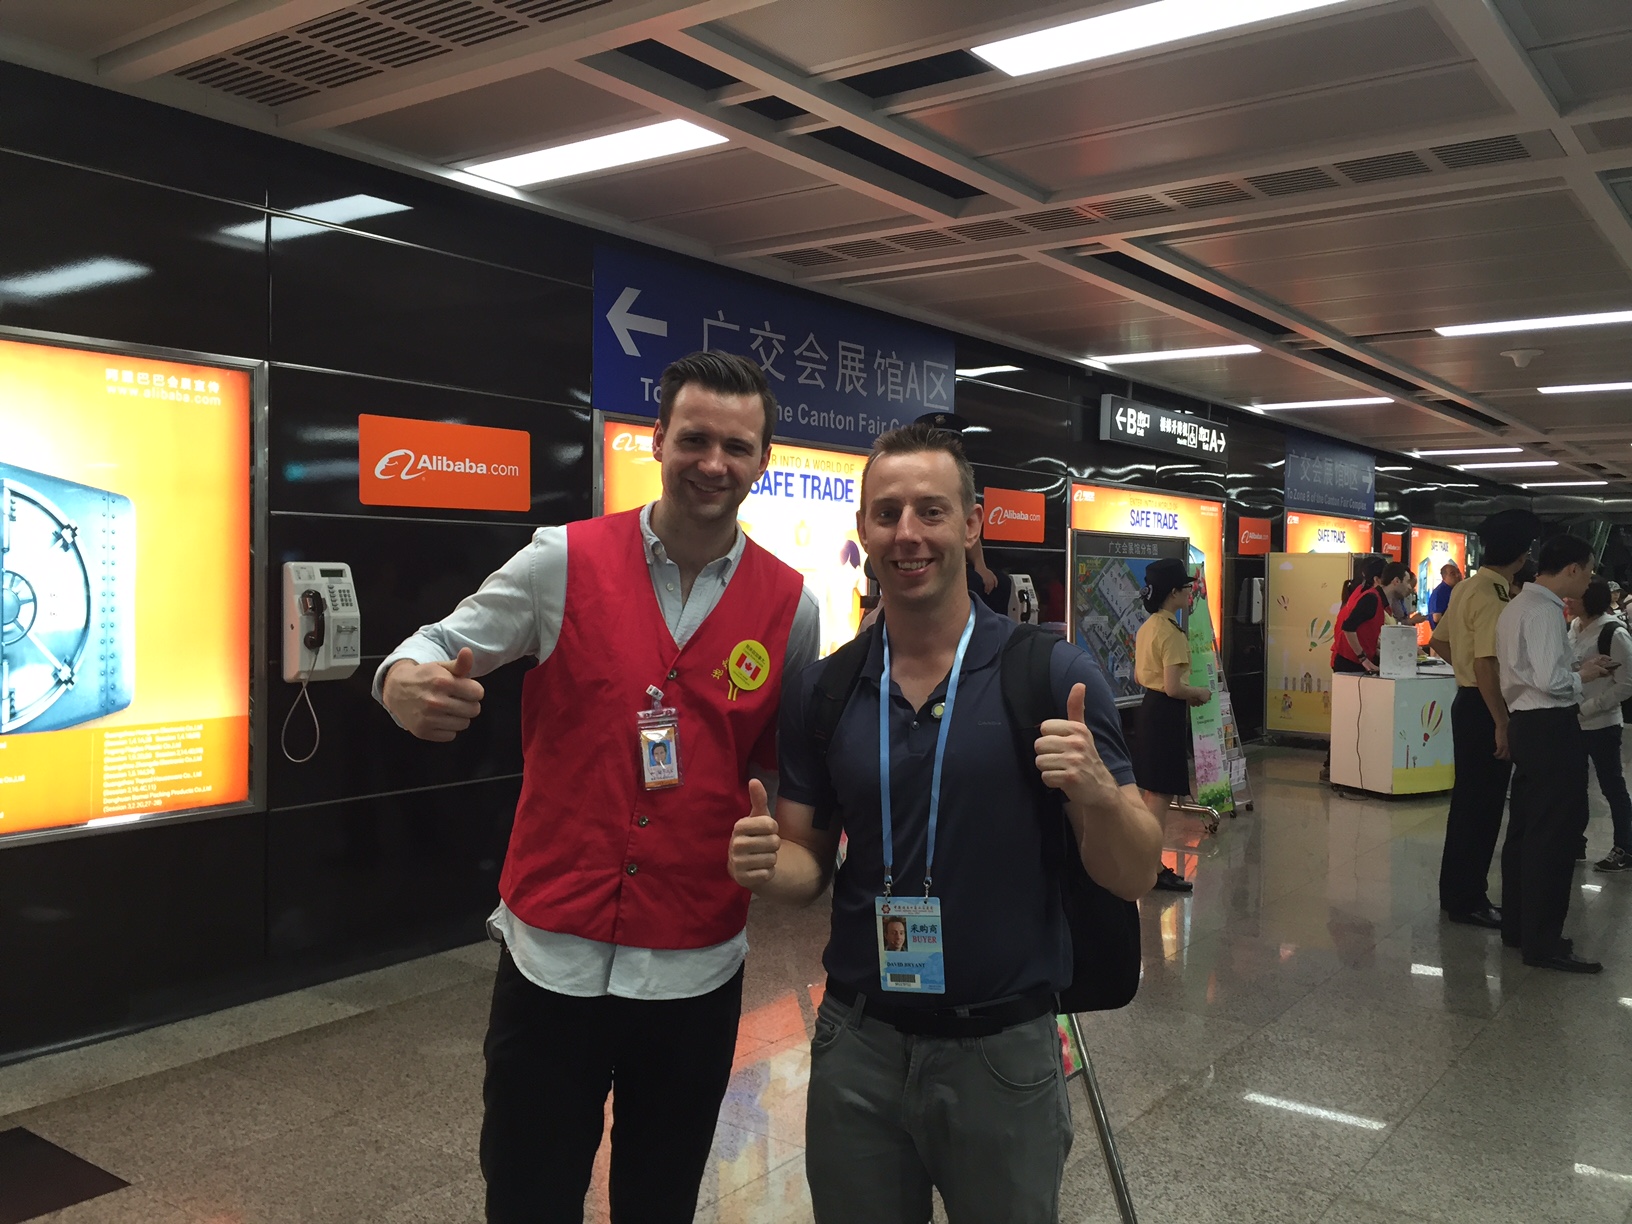 Around Metro lines you may even find Western volunteers to help you find your way to the Canton Fair.